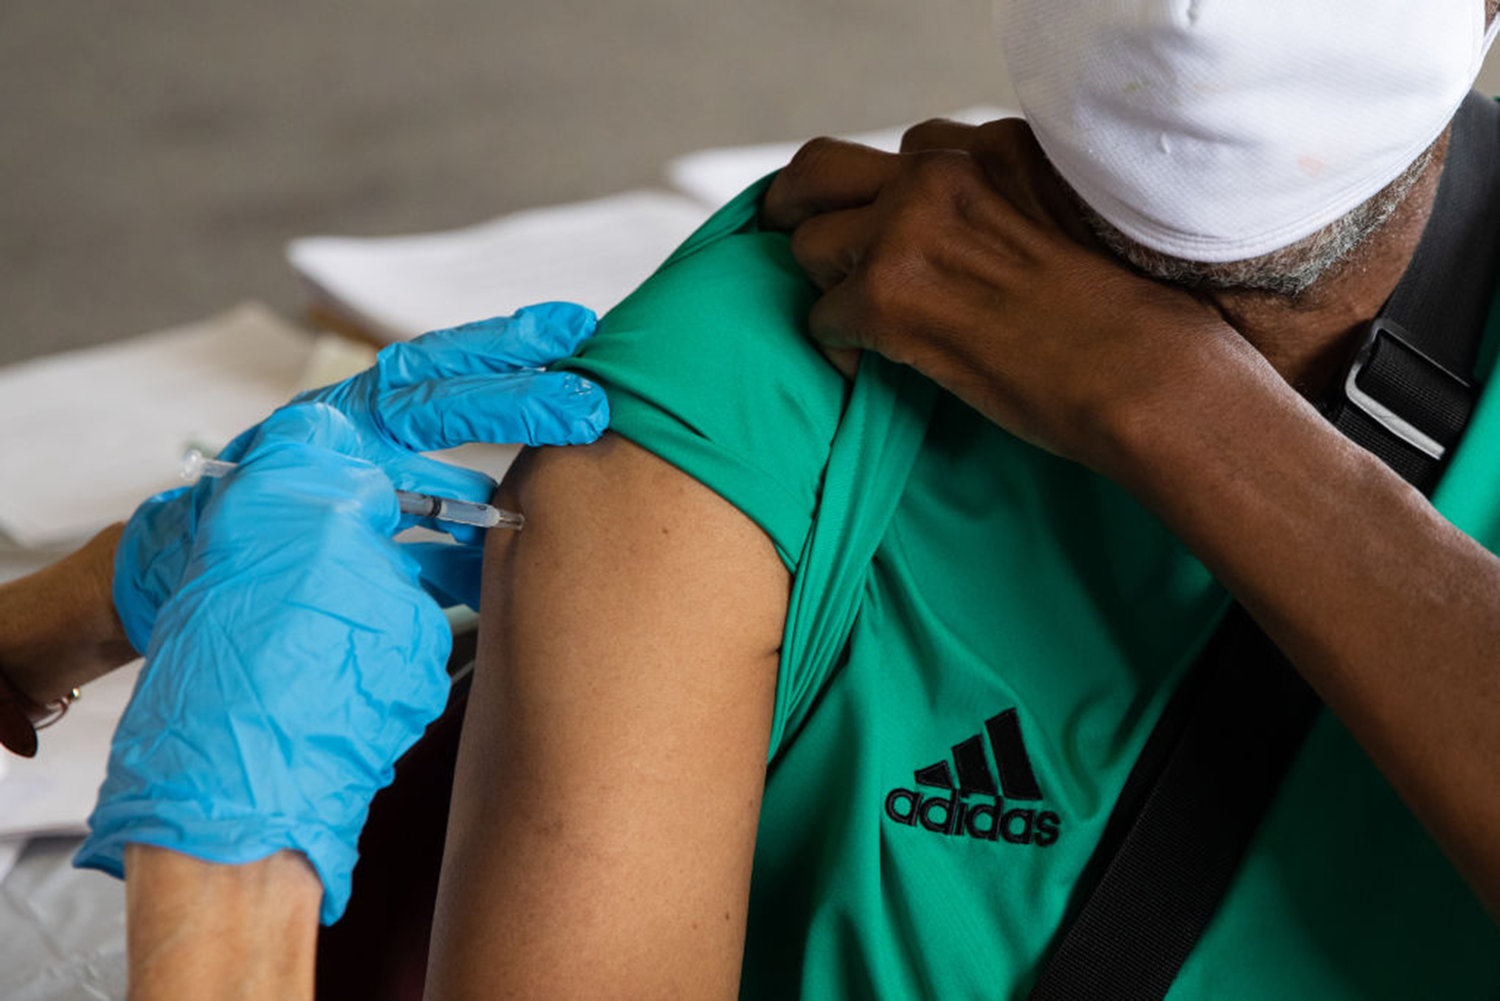 Rufus Peoples receives his booster dose of the Pfizer-BioNTech coronavirus (COVID-19) vaccine during an Oakland County Health Department vaccination clinic at the Southfield Pavilion on Aug. 24, 2021 in Southfield, Michigan. (Emily Elconin/Getty Images/TNS)